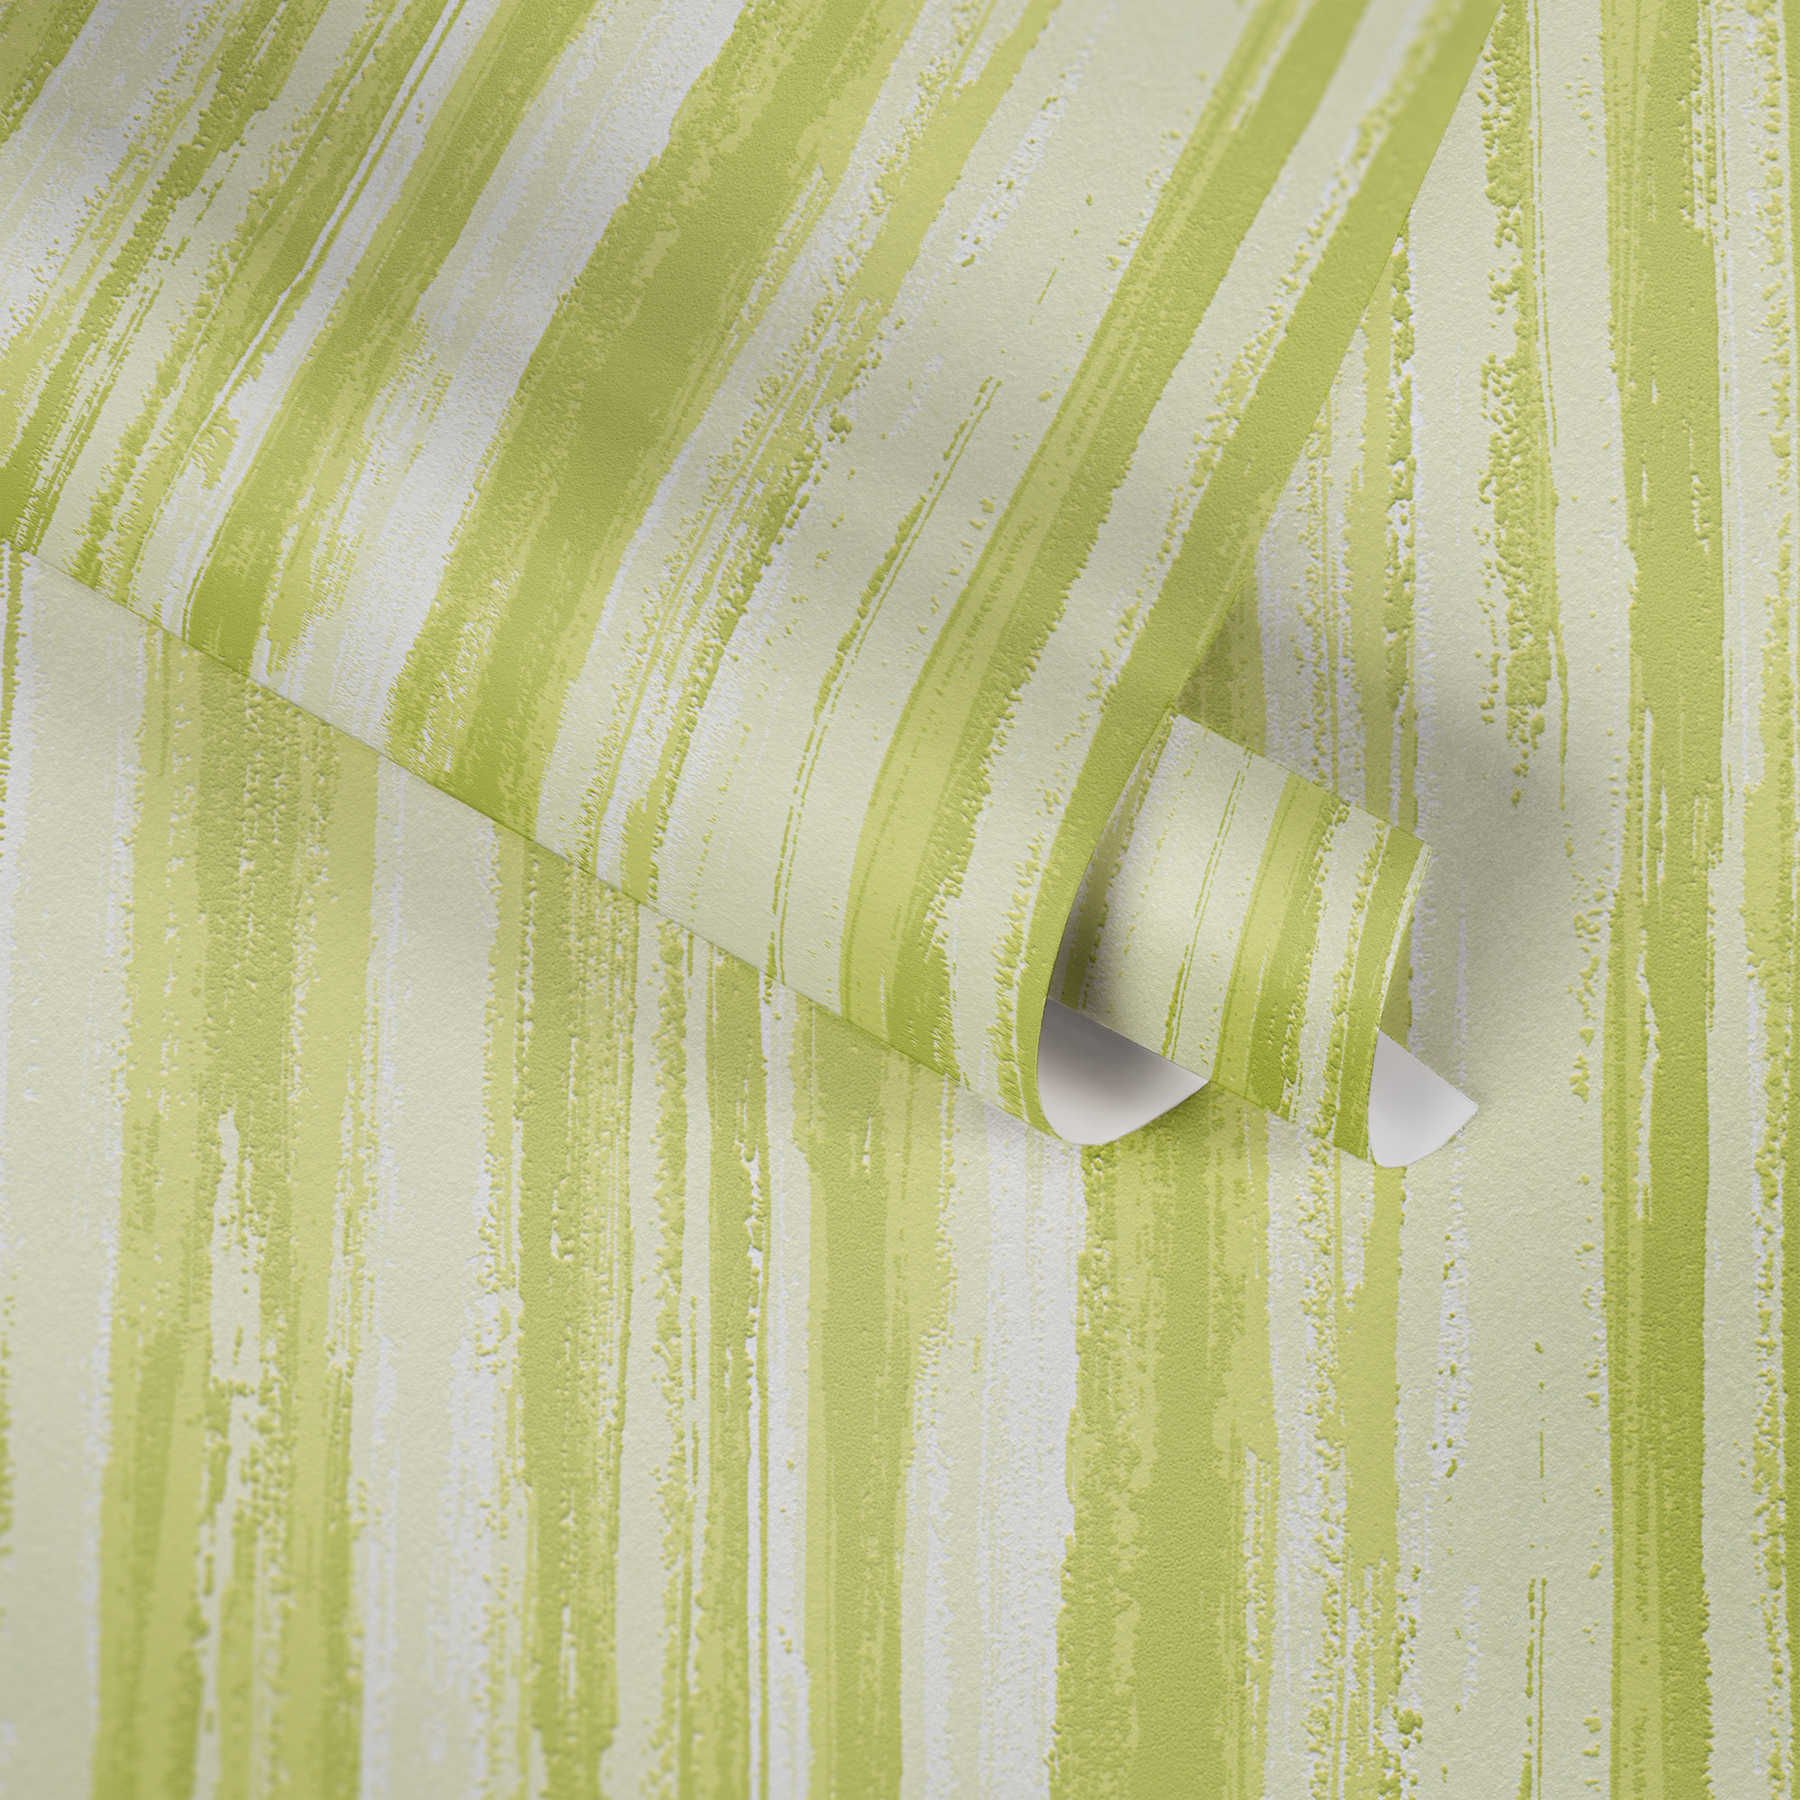             Green wallpaper with natural line pattern - green, white
        